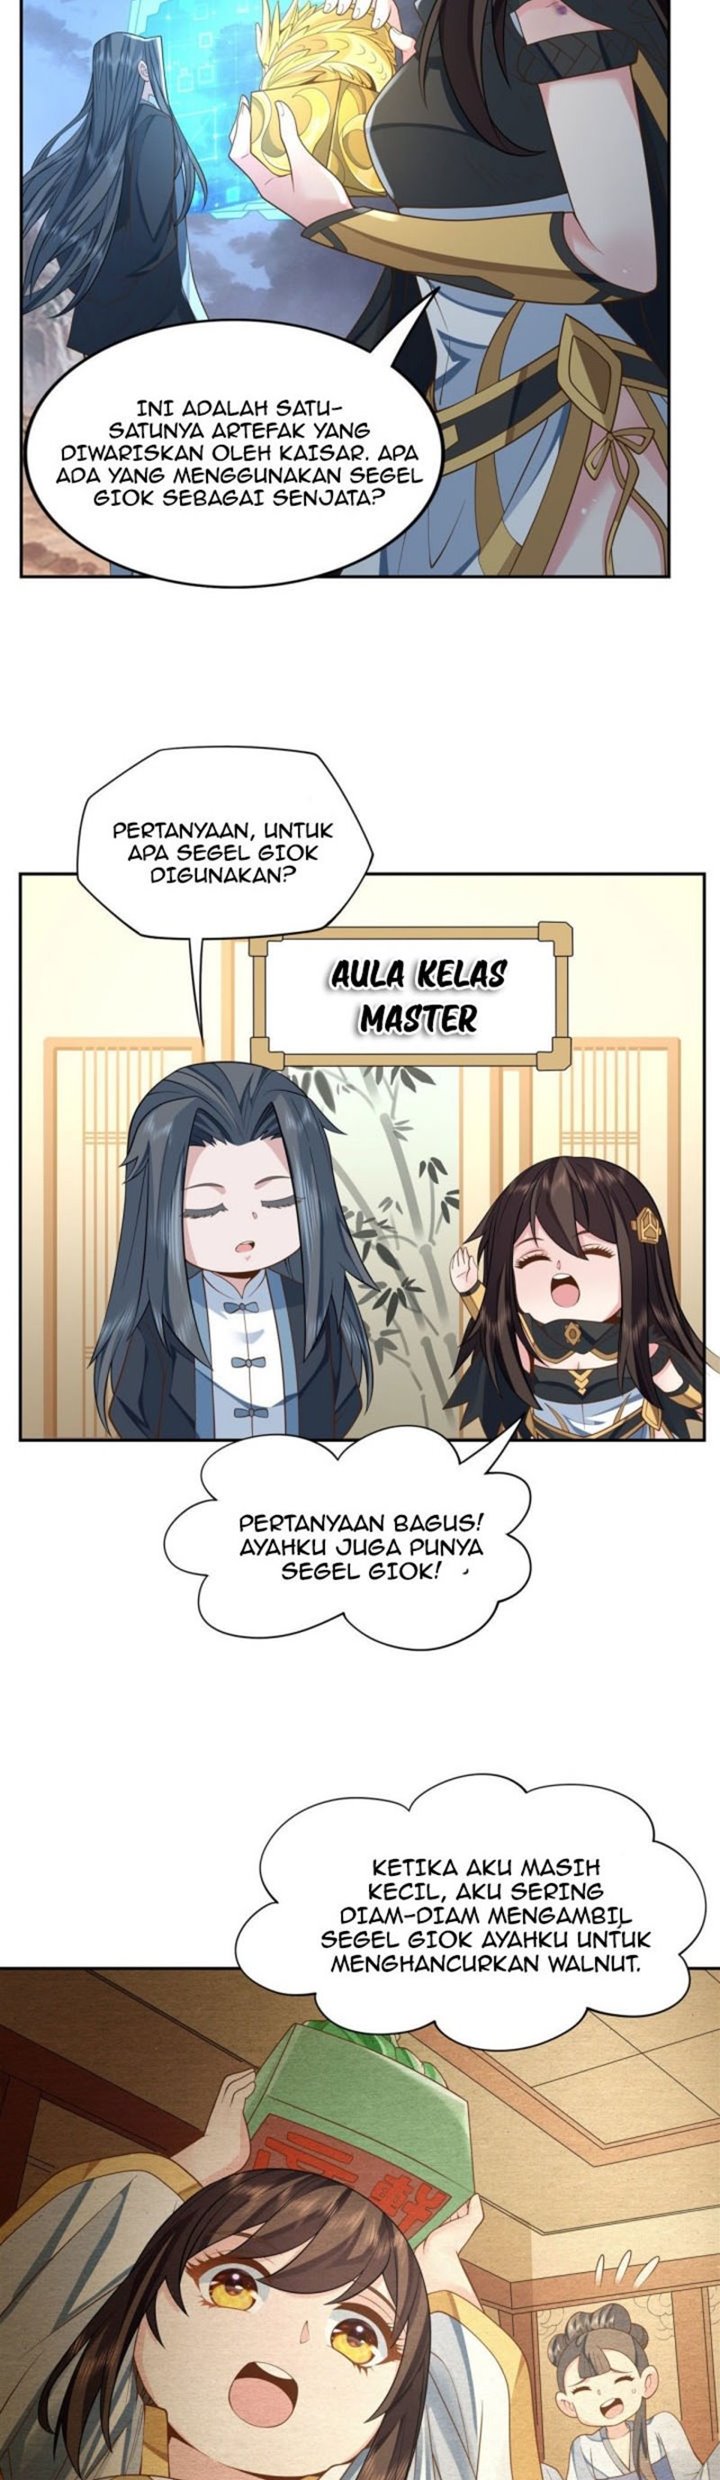 Dilarang COPAS - situs resmi www.mangacanblog.com - Komik my female apprentices are all big shots from the future 014 - chapter 14 15 Indonesia my female apprentices are all big shots from the future 014 - chapter 14 Terbaru 10|Baca Manga Komik Indonesia|Mangacan